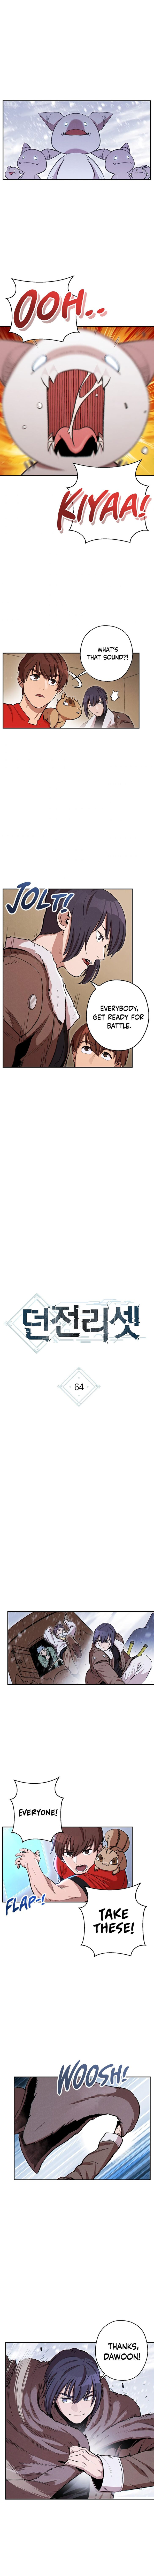 Dungeon Reset chapter 0.064